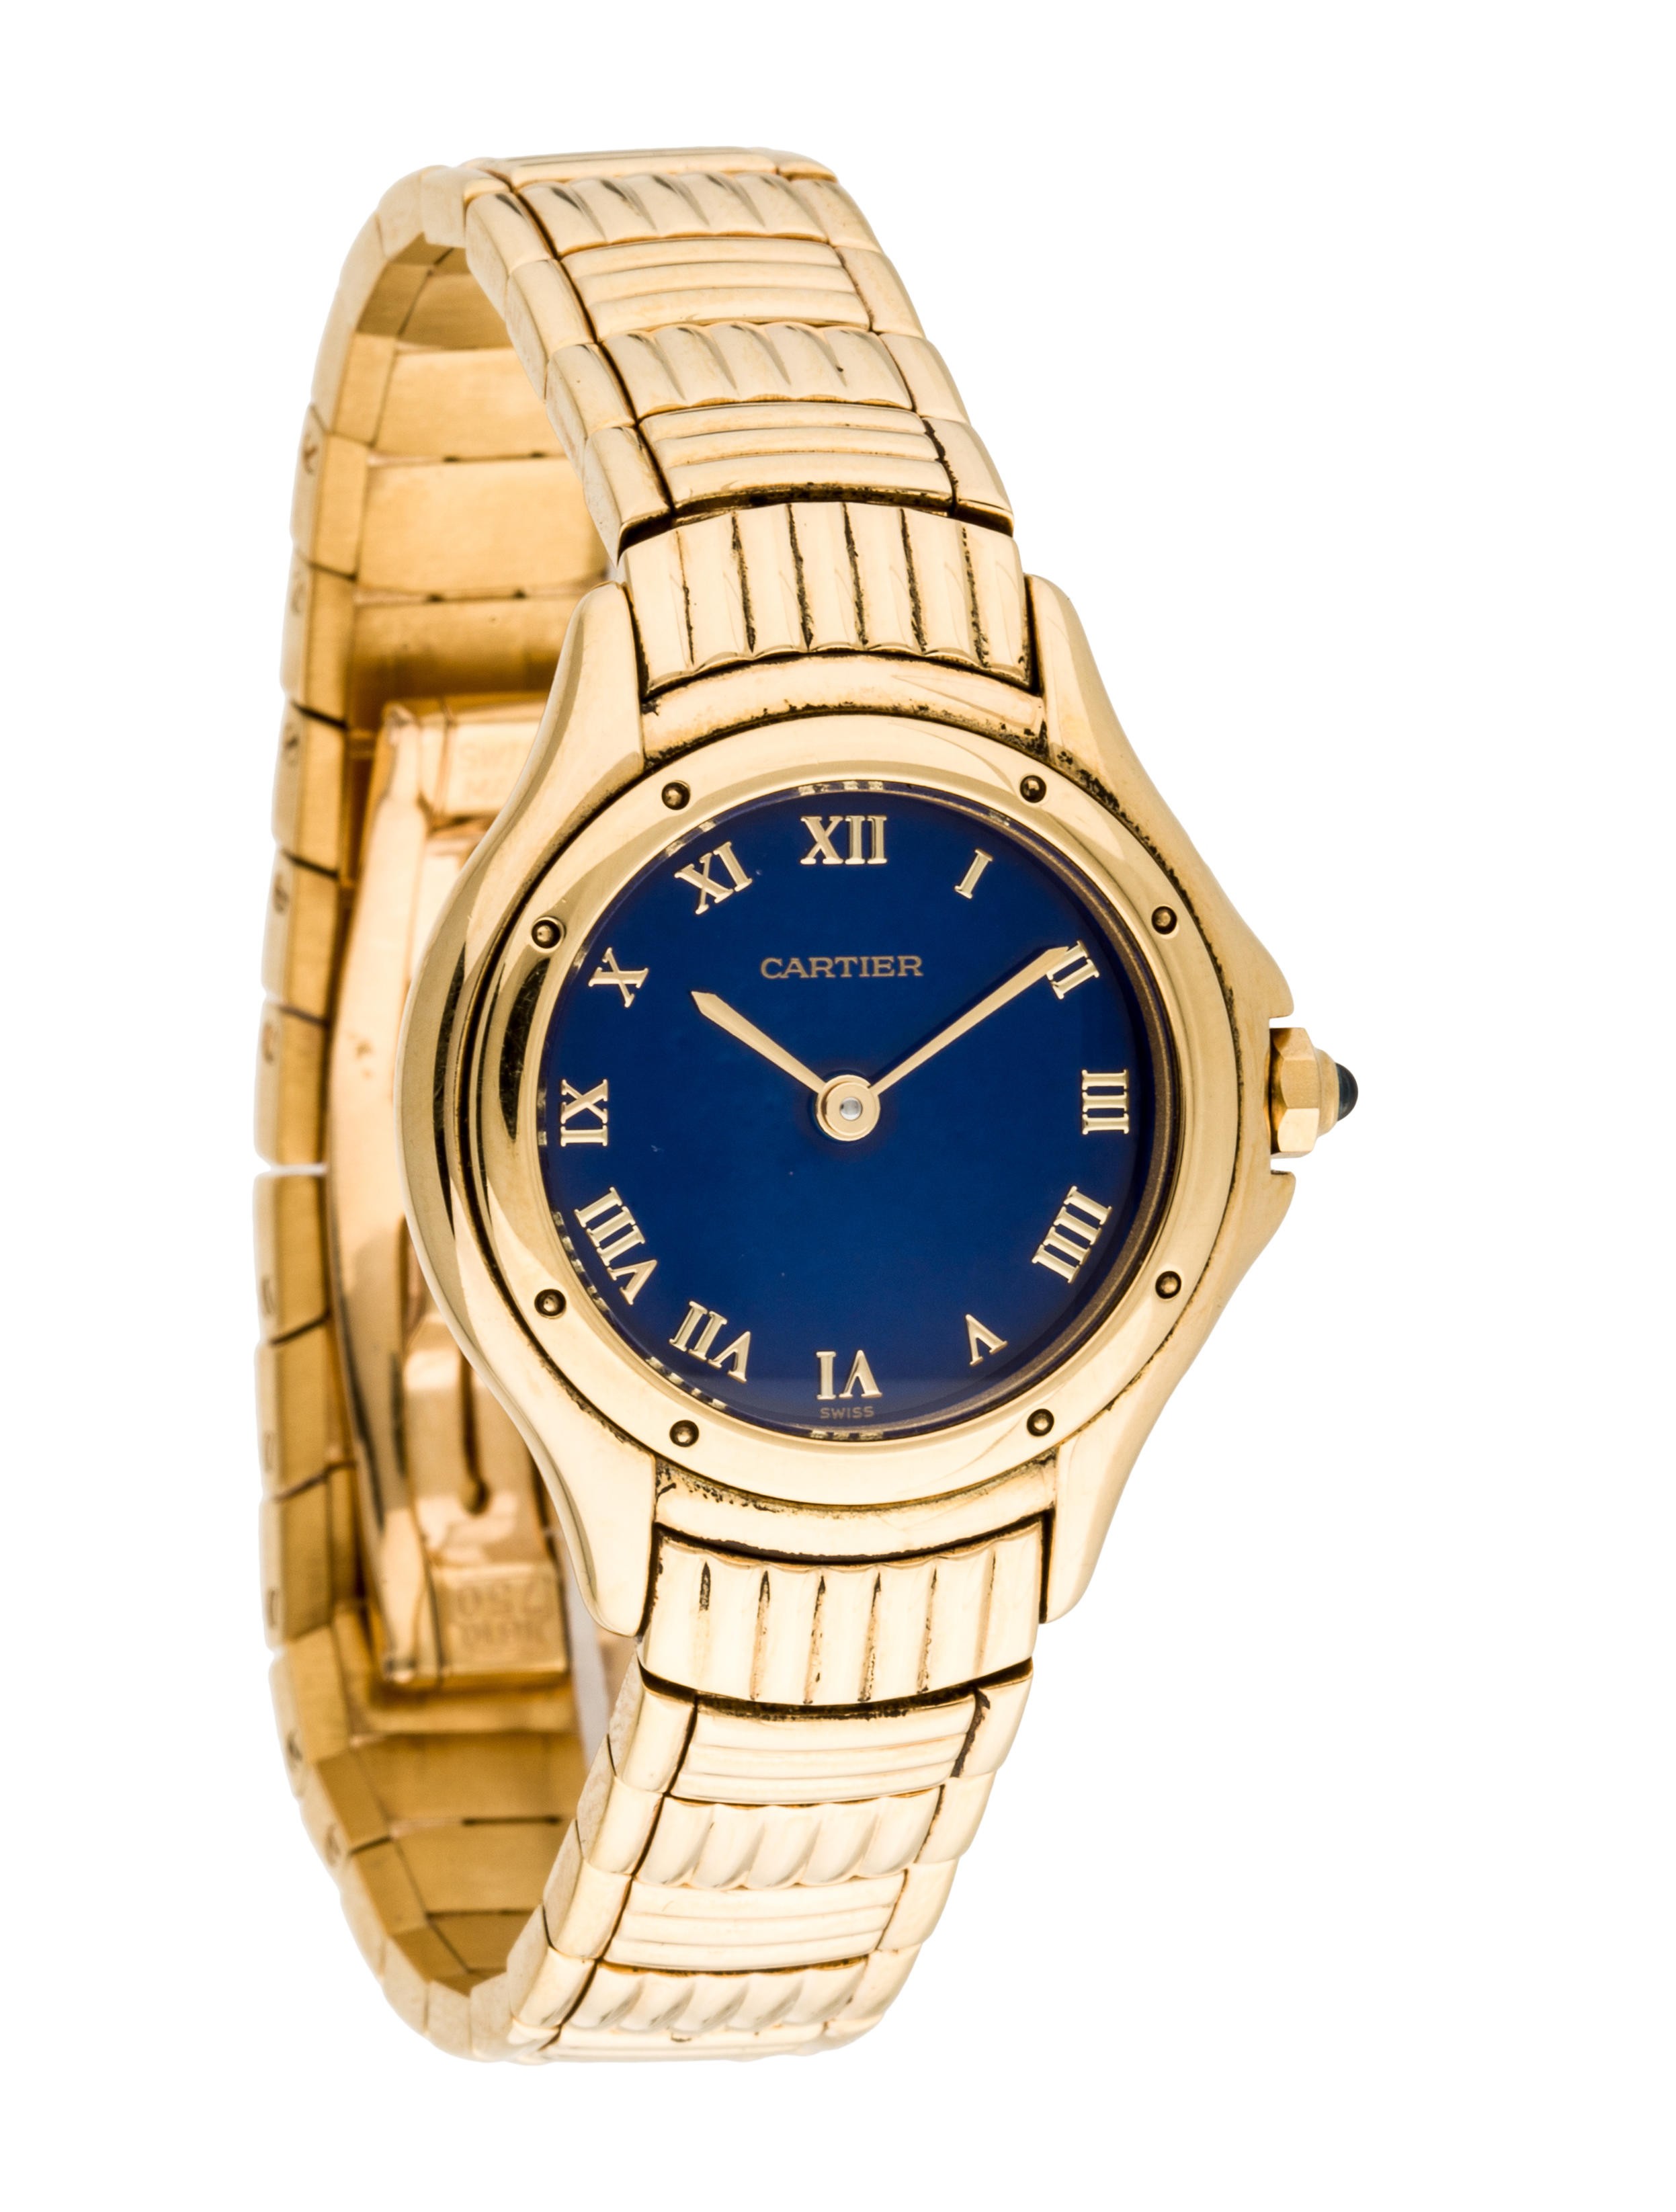 Cougar in Yellow Gold on Yellow Gold Bracelet with Blue Dial